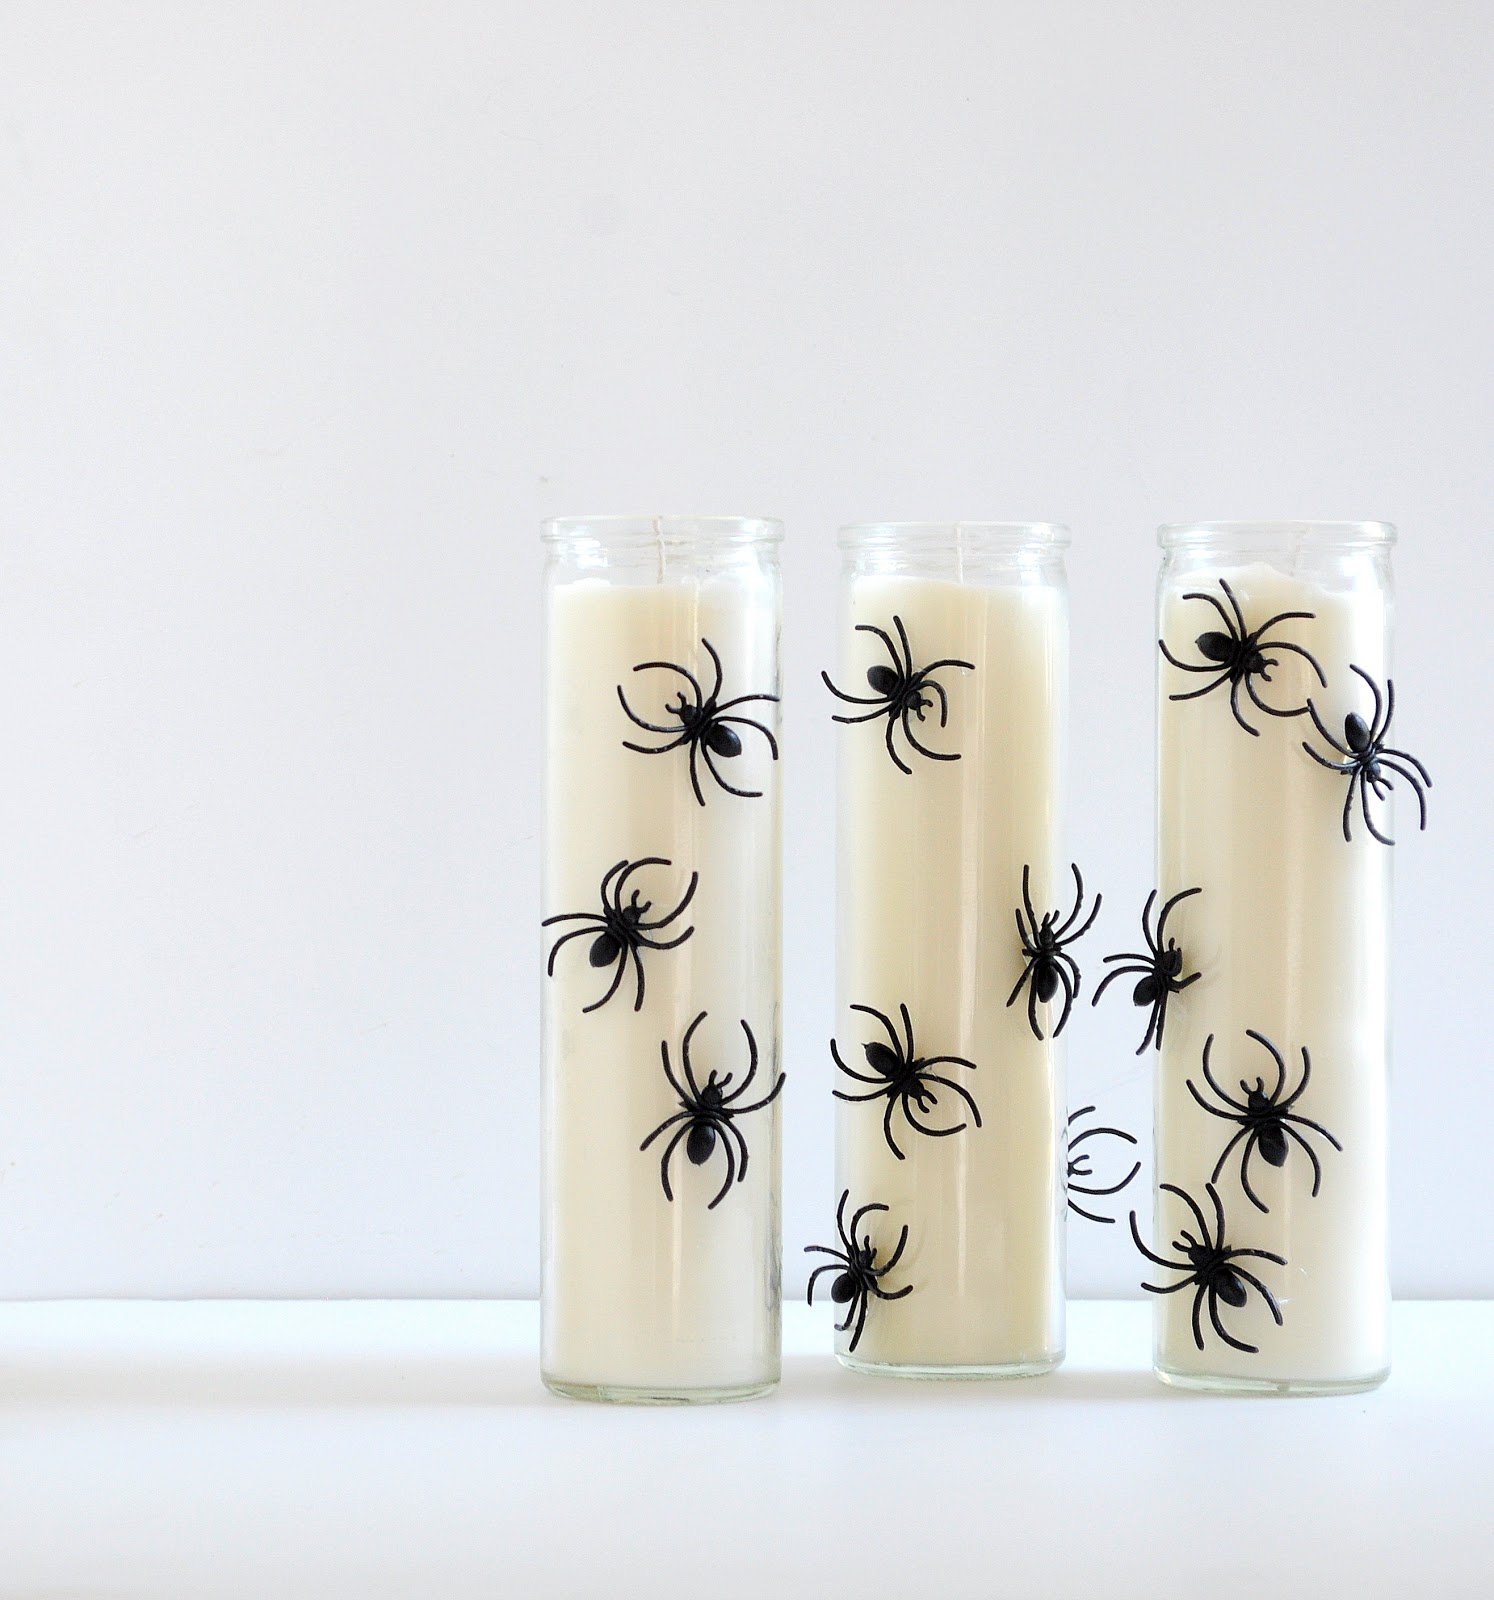 Spooky Spider Halloween Candles